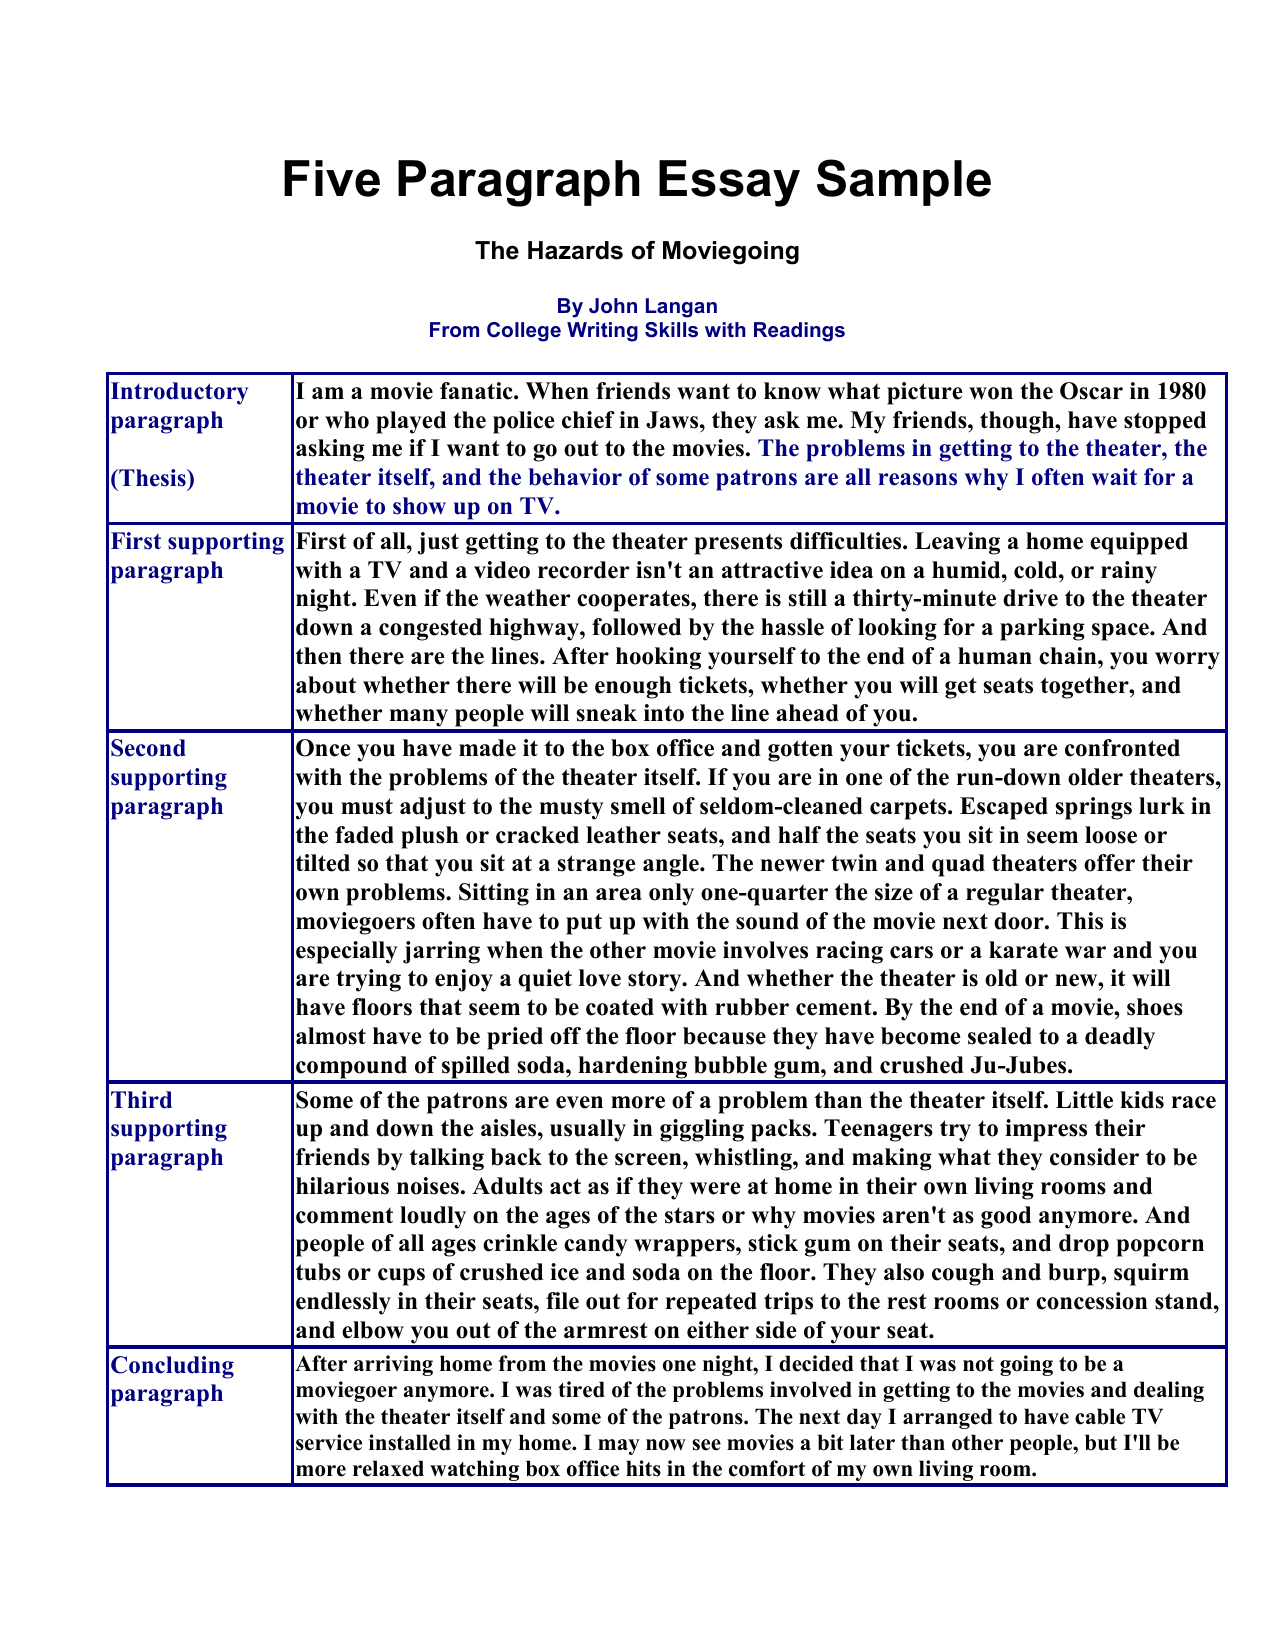 how should a 5 paragraph essay look like